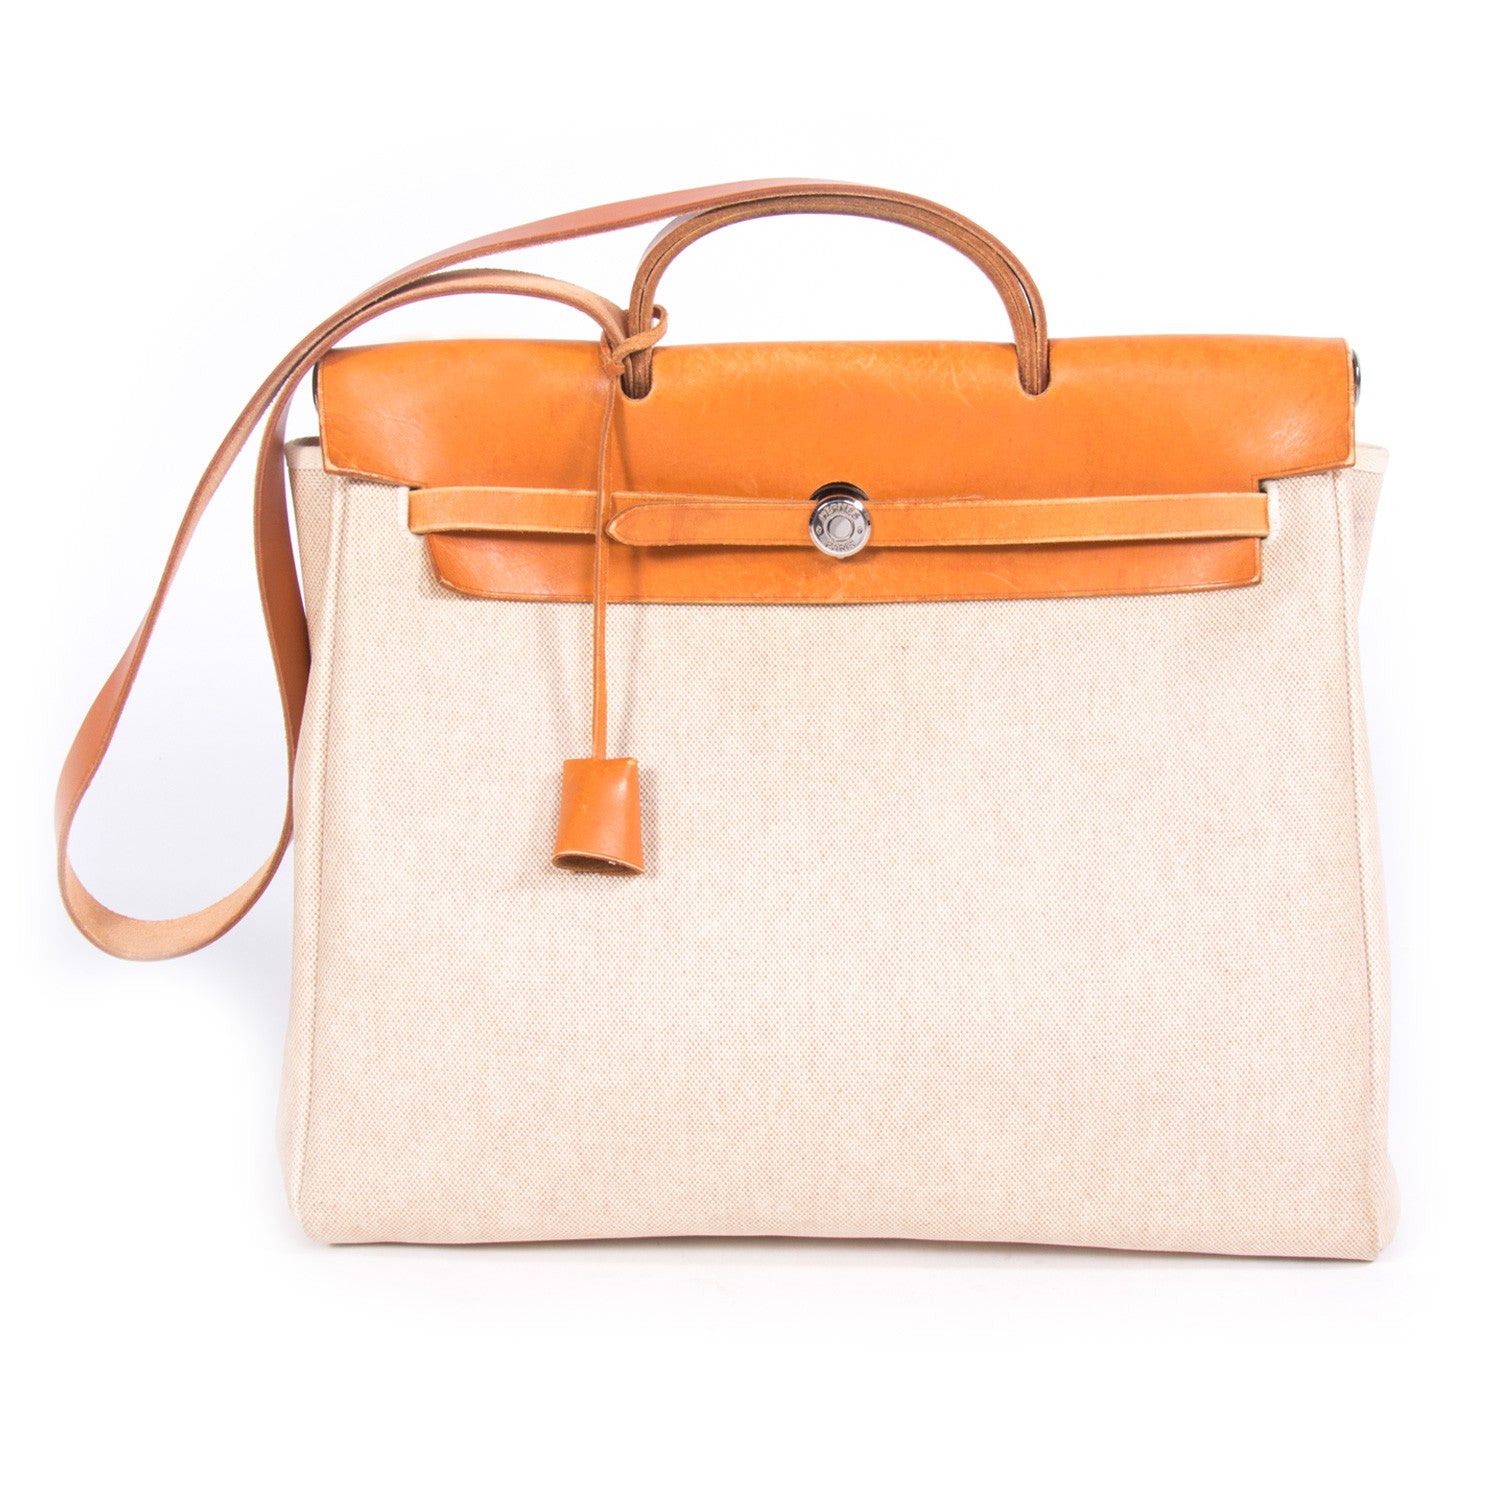 Shop authentic Hermes Herbag GM at revogue for just USD 1,299.00